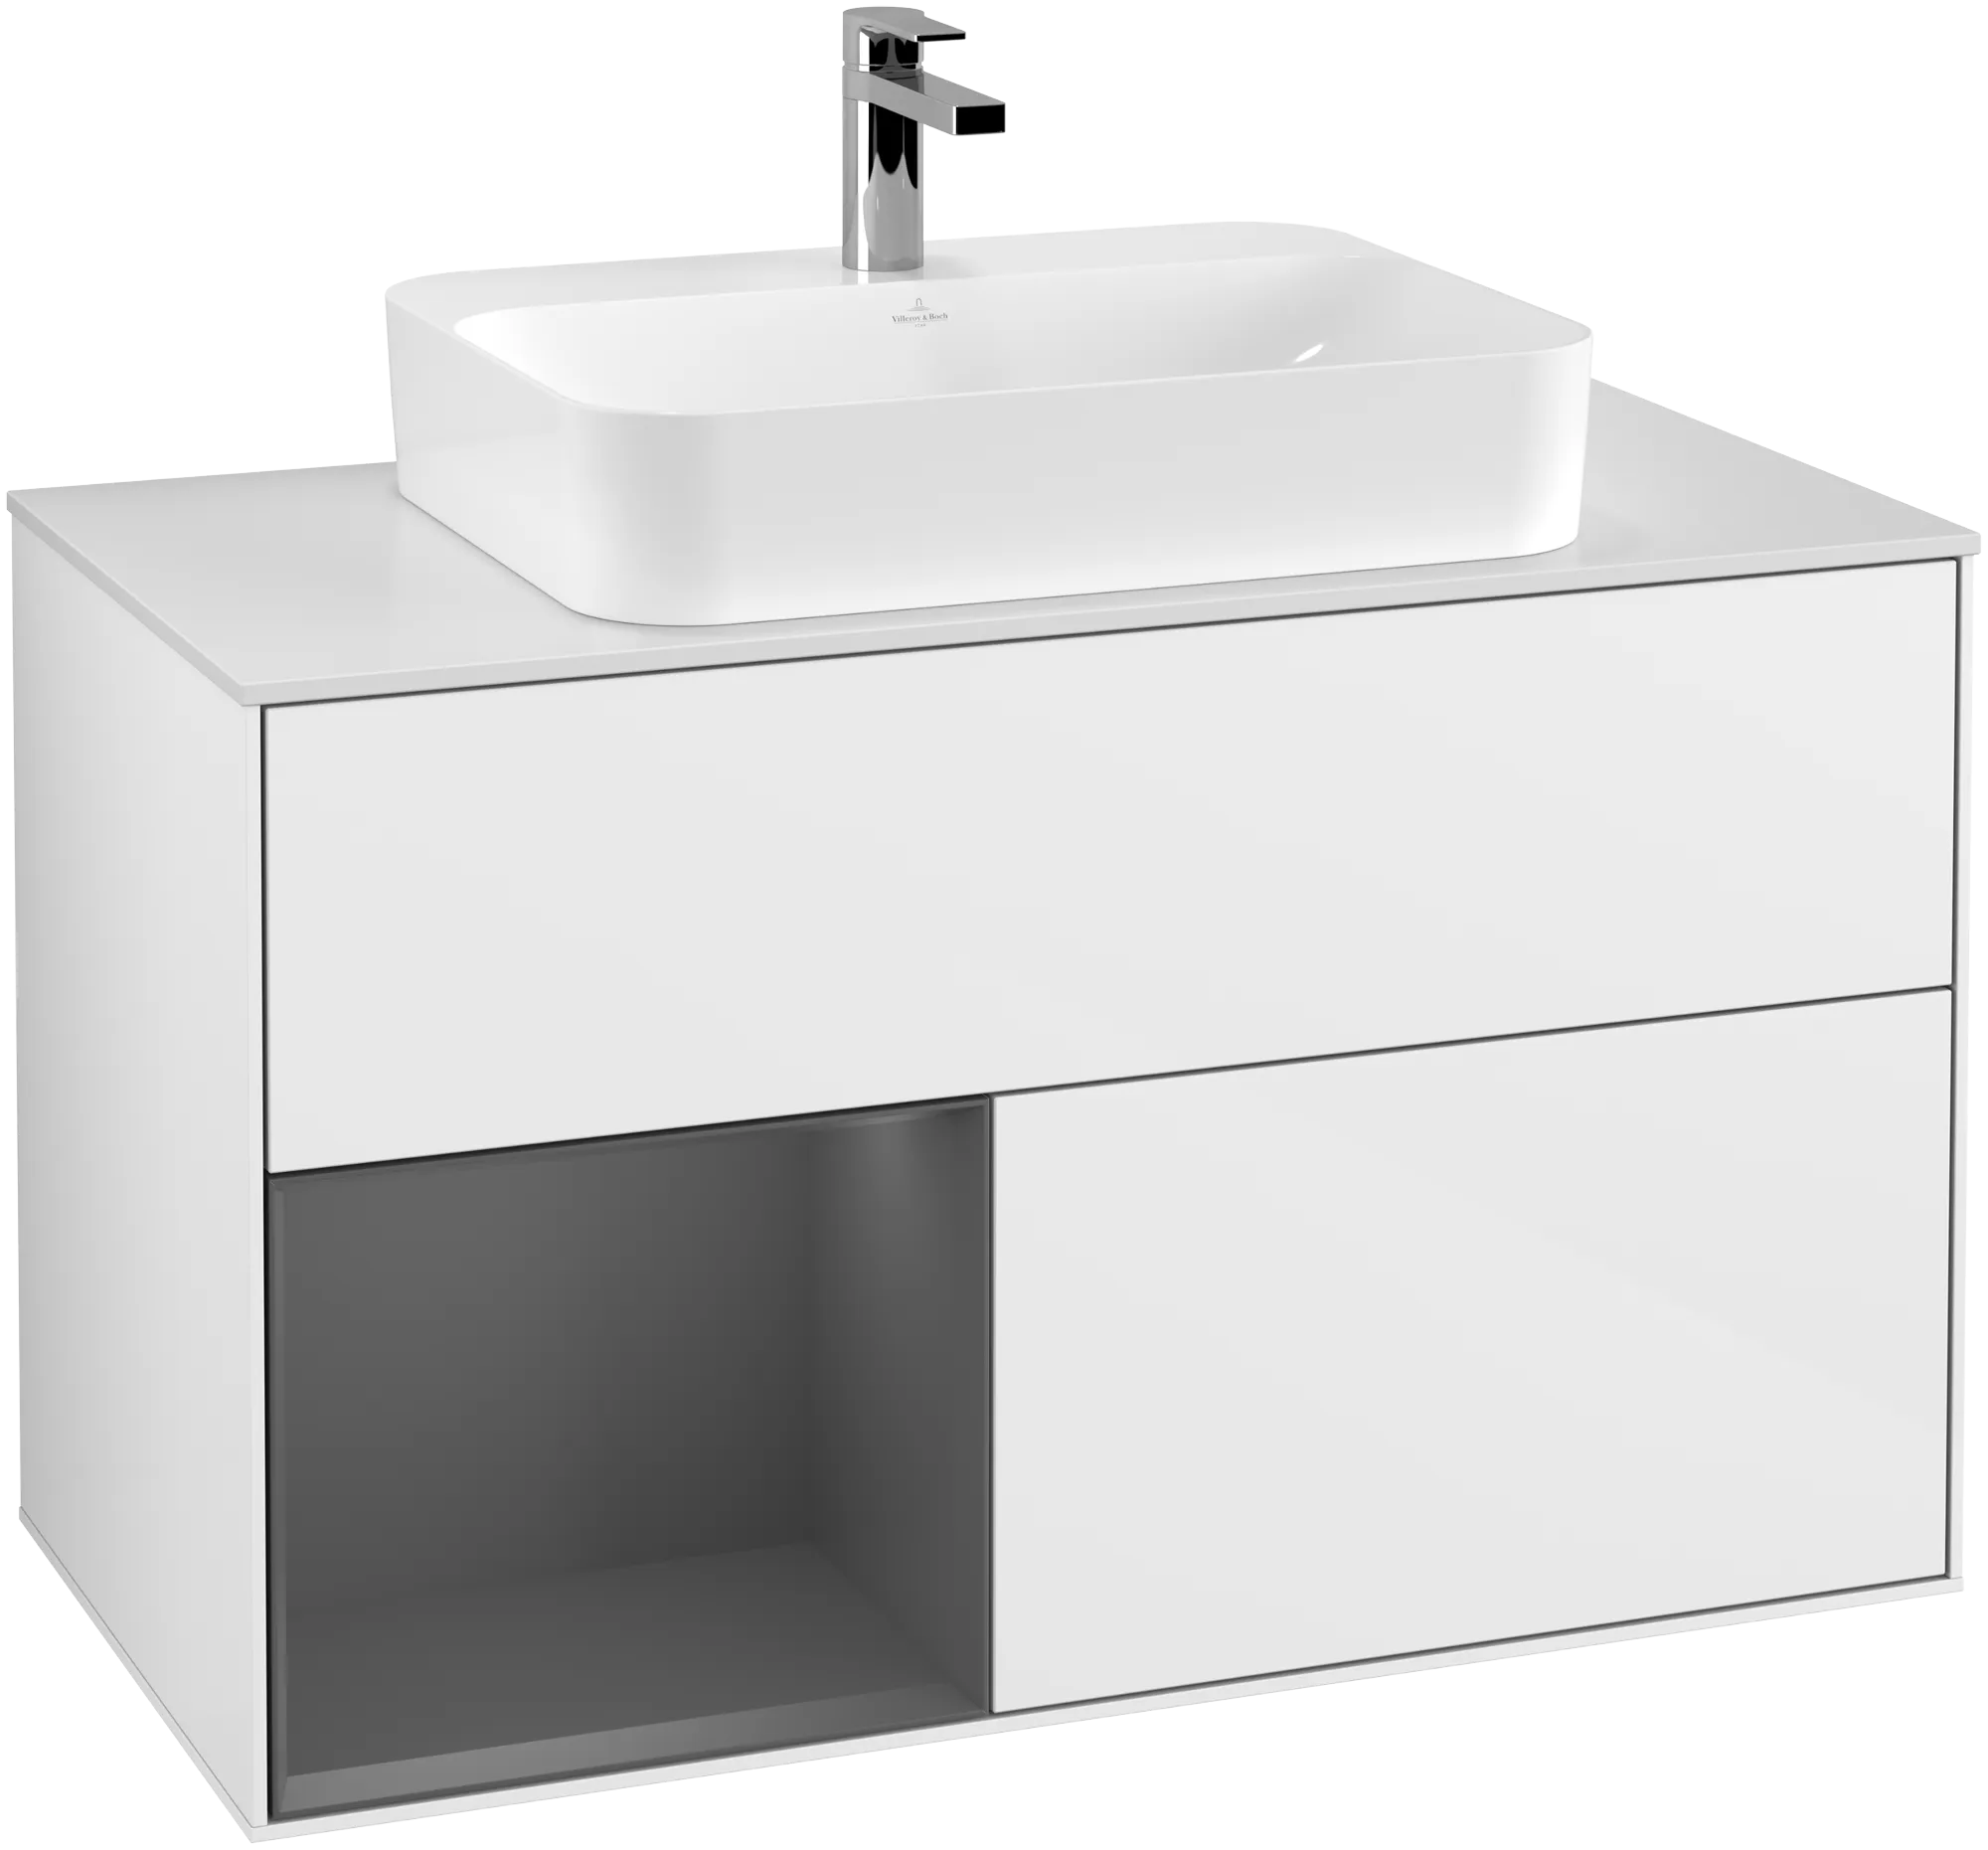 Зображення з  VILLEROY BOCH Finion Vanity unit, with lighting, 2 pull-out compartments, 1000 x 603 x 501 mm, Glossy White Lacquer / Anthracite Matt Lacquer / Glass White Matt #G361GKGF